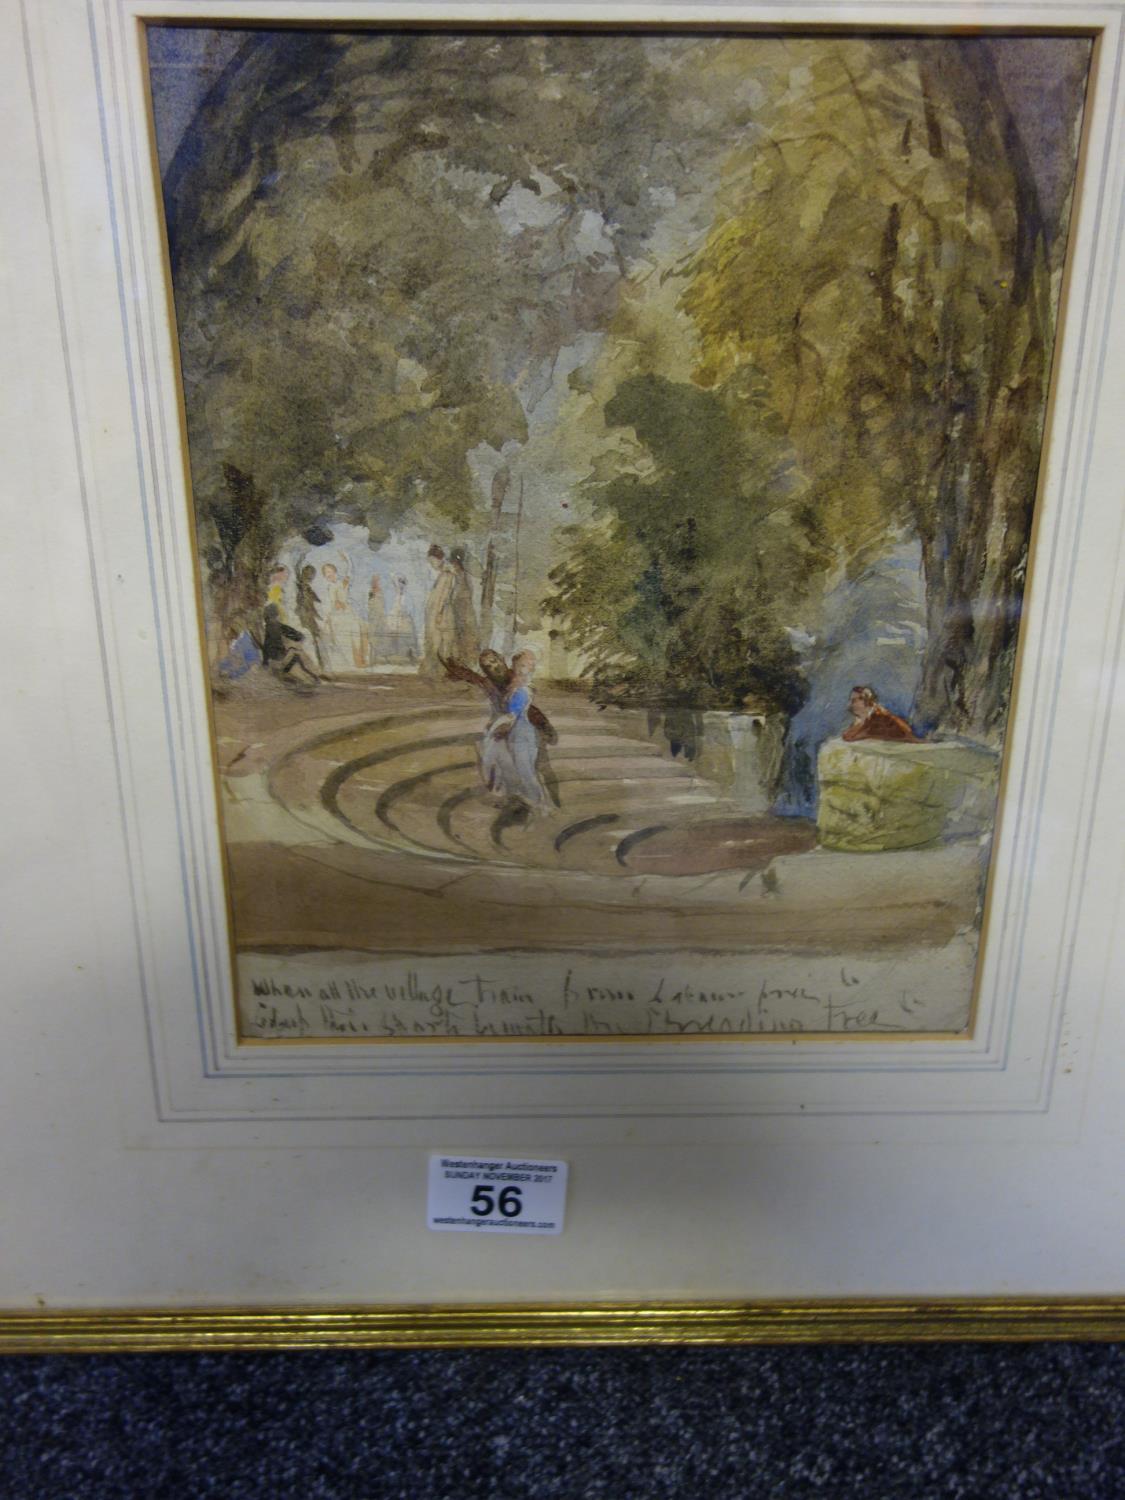 Framed & Glazed watercolour by John Fully Love, classical figures under a tree with artist